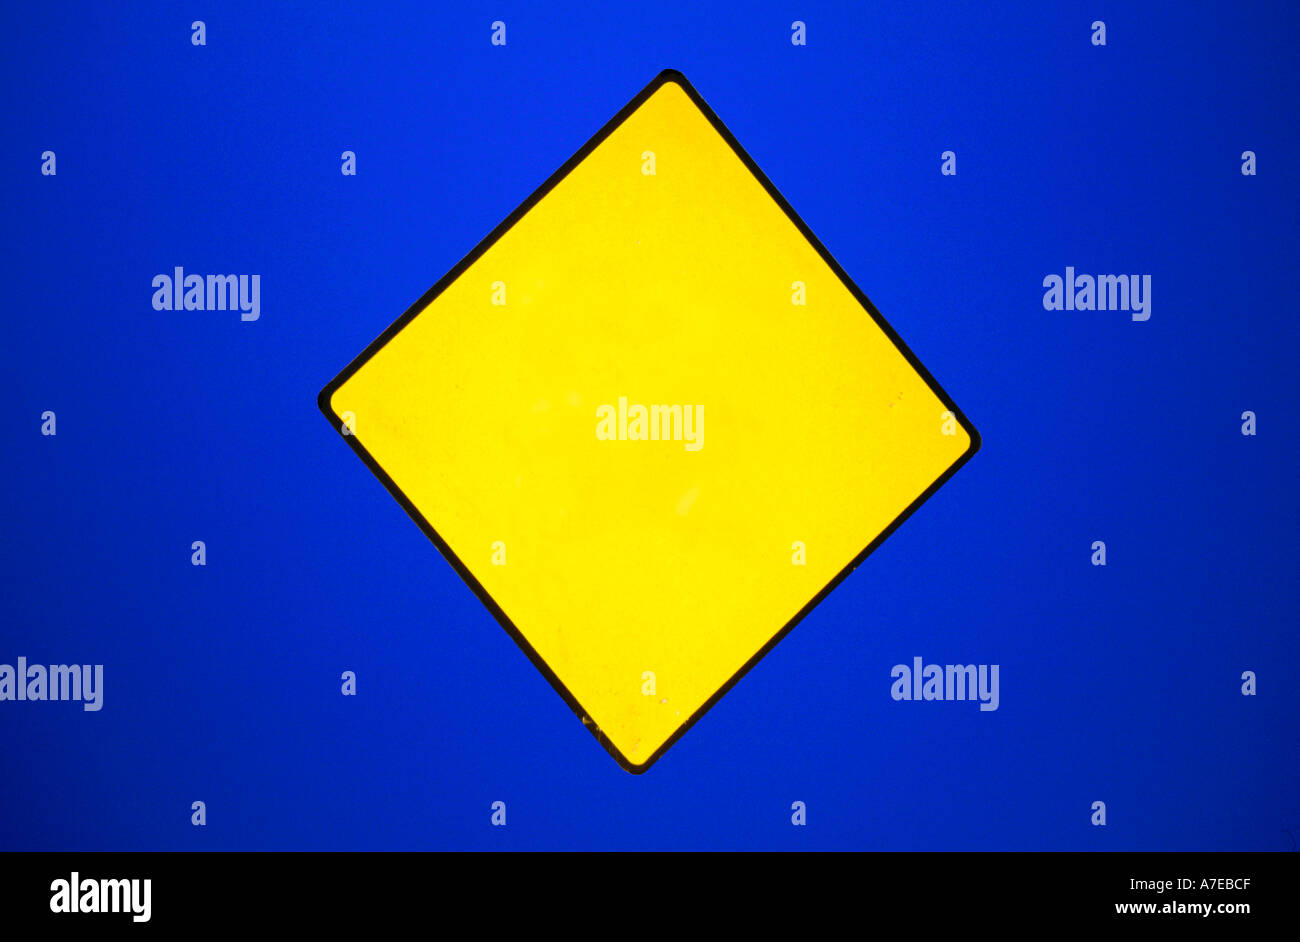 Yellow diamond road sign blank on blue background Landscape format Stock Photo